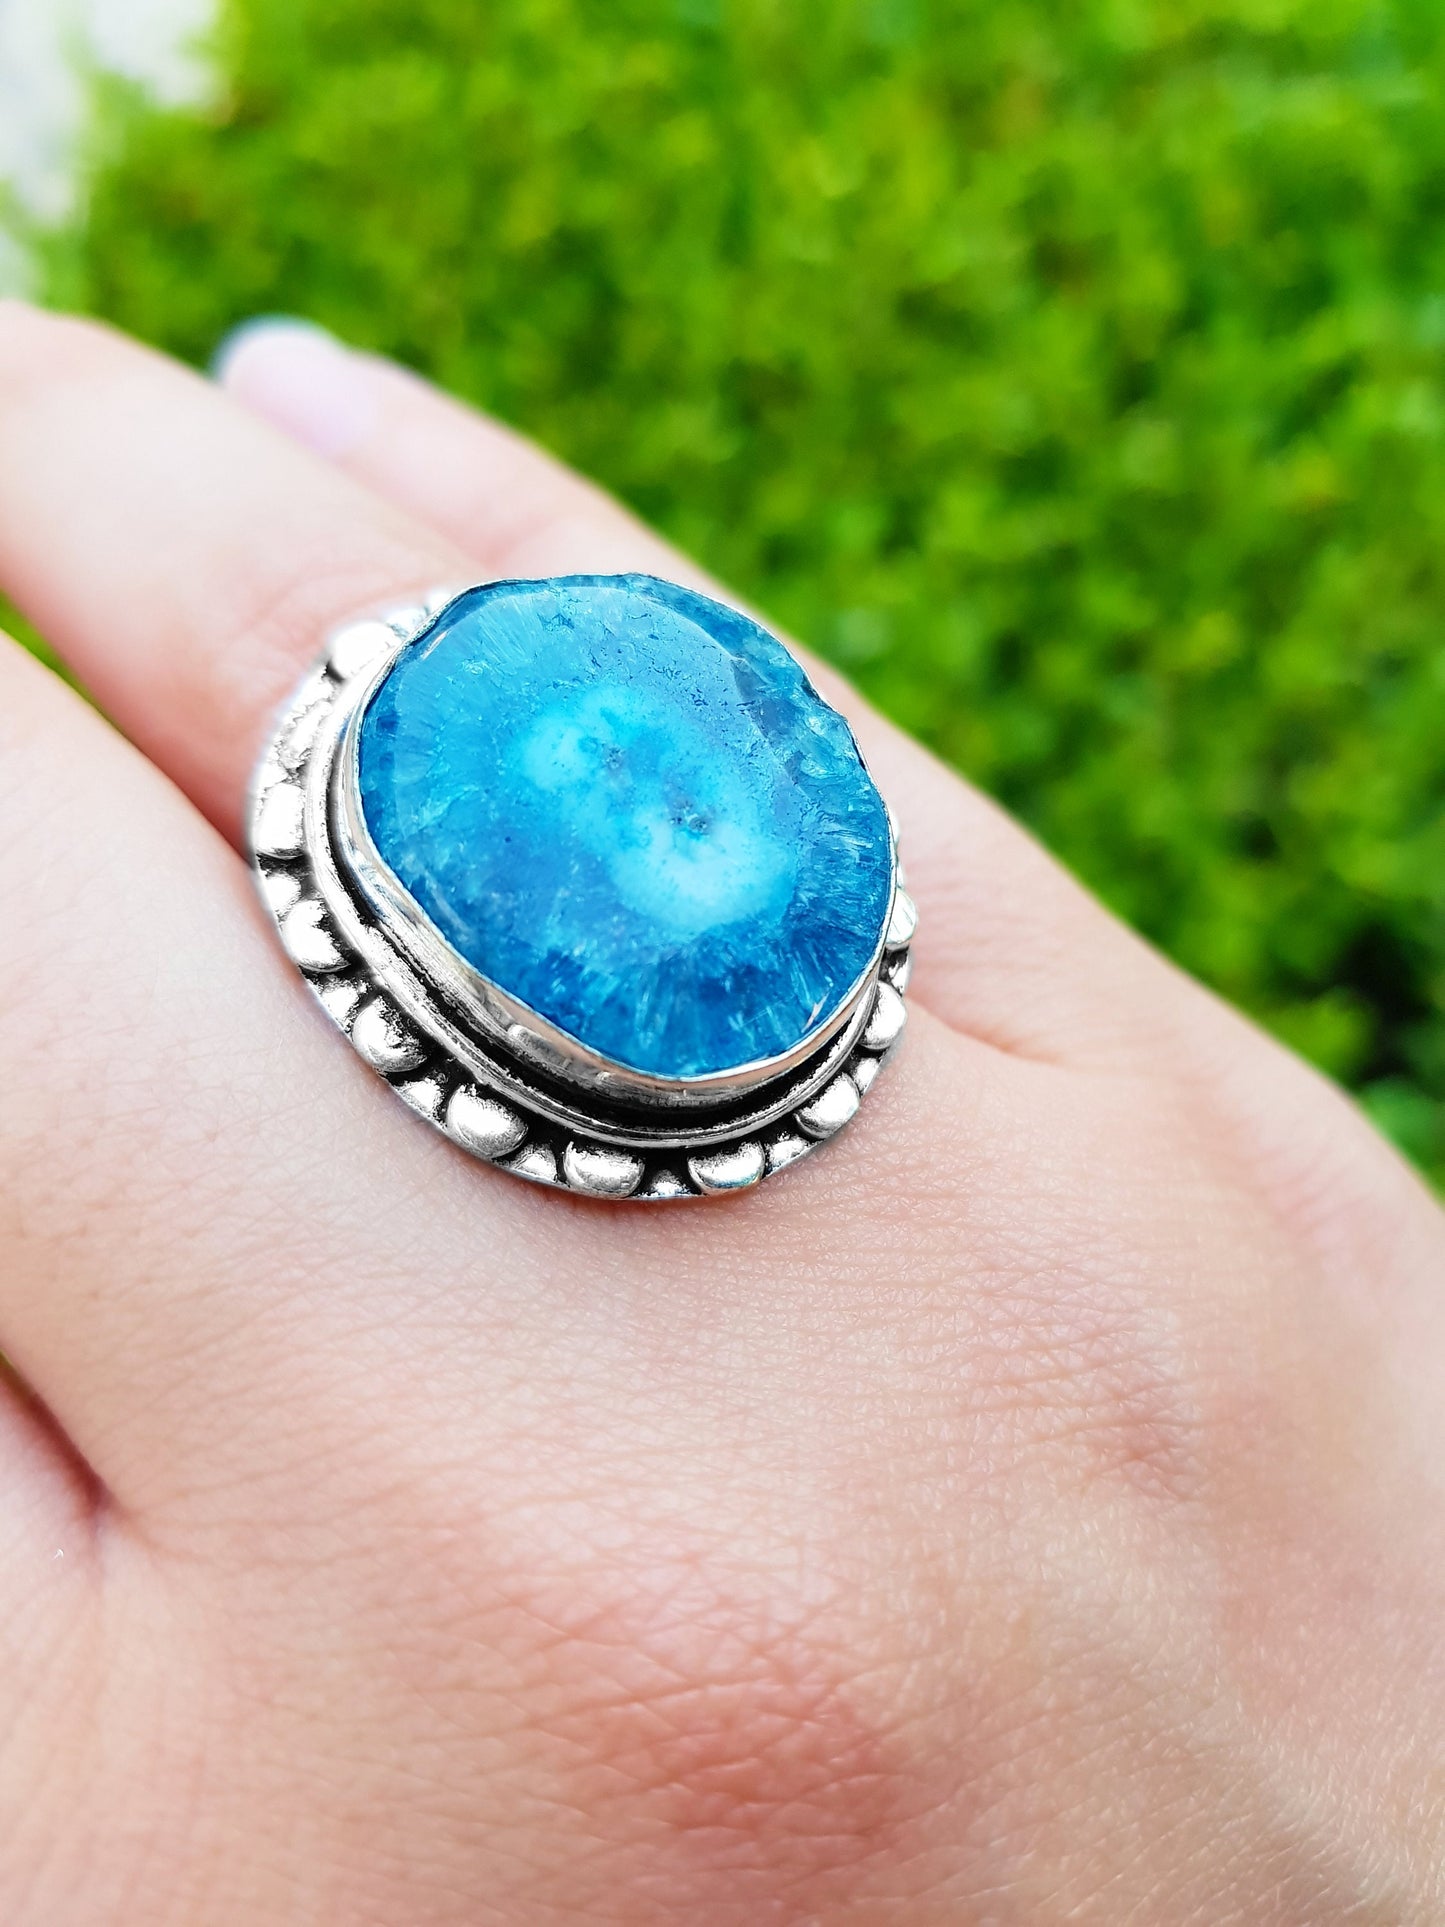 Blue Solar Agate Ring In Sterling Silver Size US 8 1/2 Big Statement Ring Boho Rings Raw Gemstone Ring Unique Gift For Her